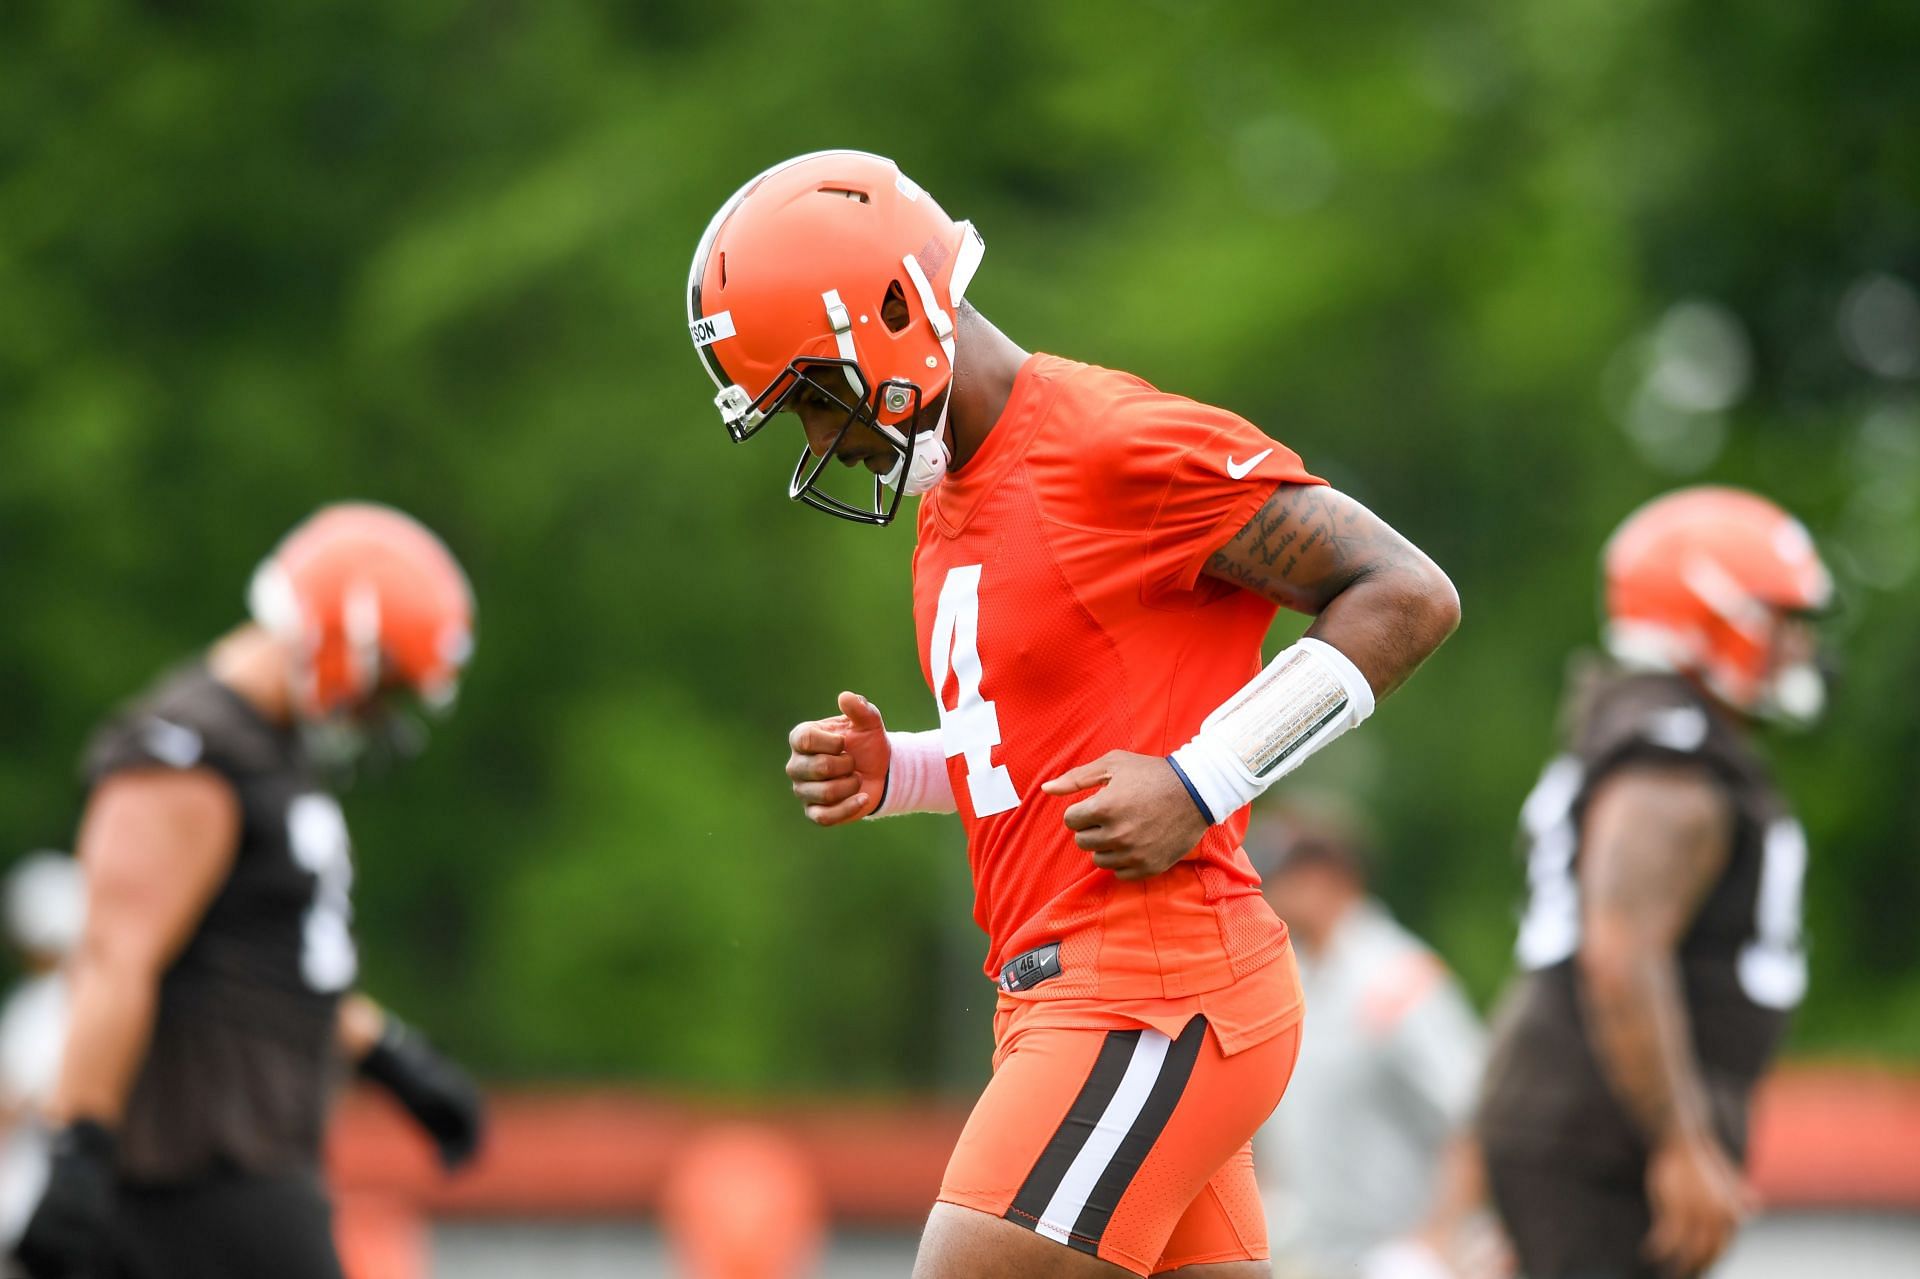 Minicamp+Preview%3A+How+much+will+Deshaun+Watson+do%26%238230%3Band+four+other+things+to+watch